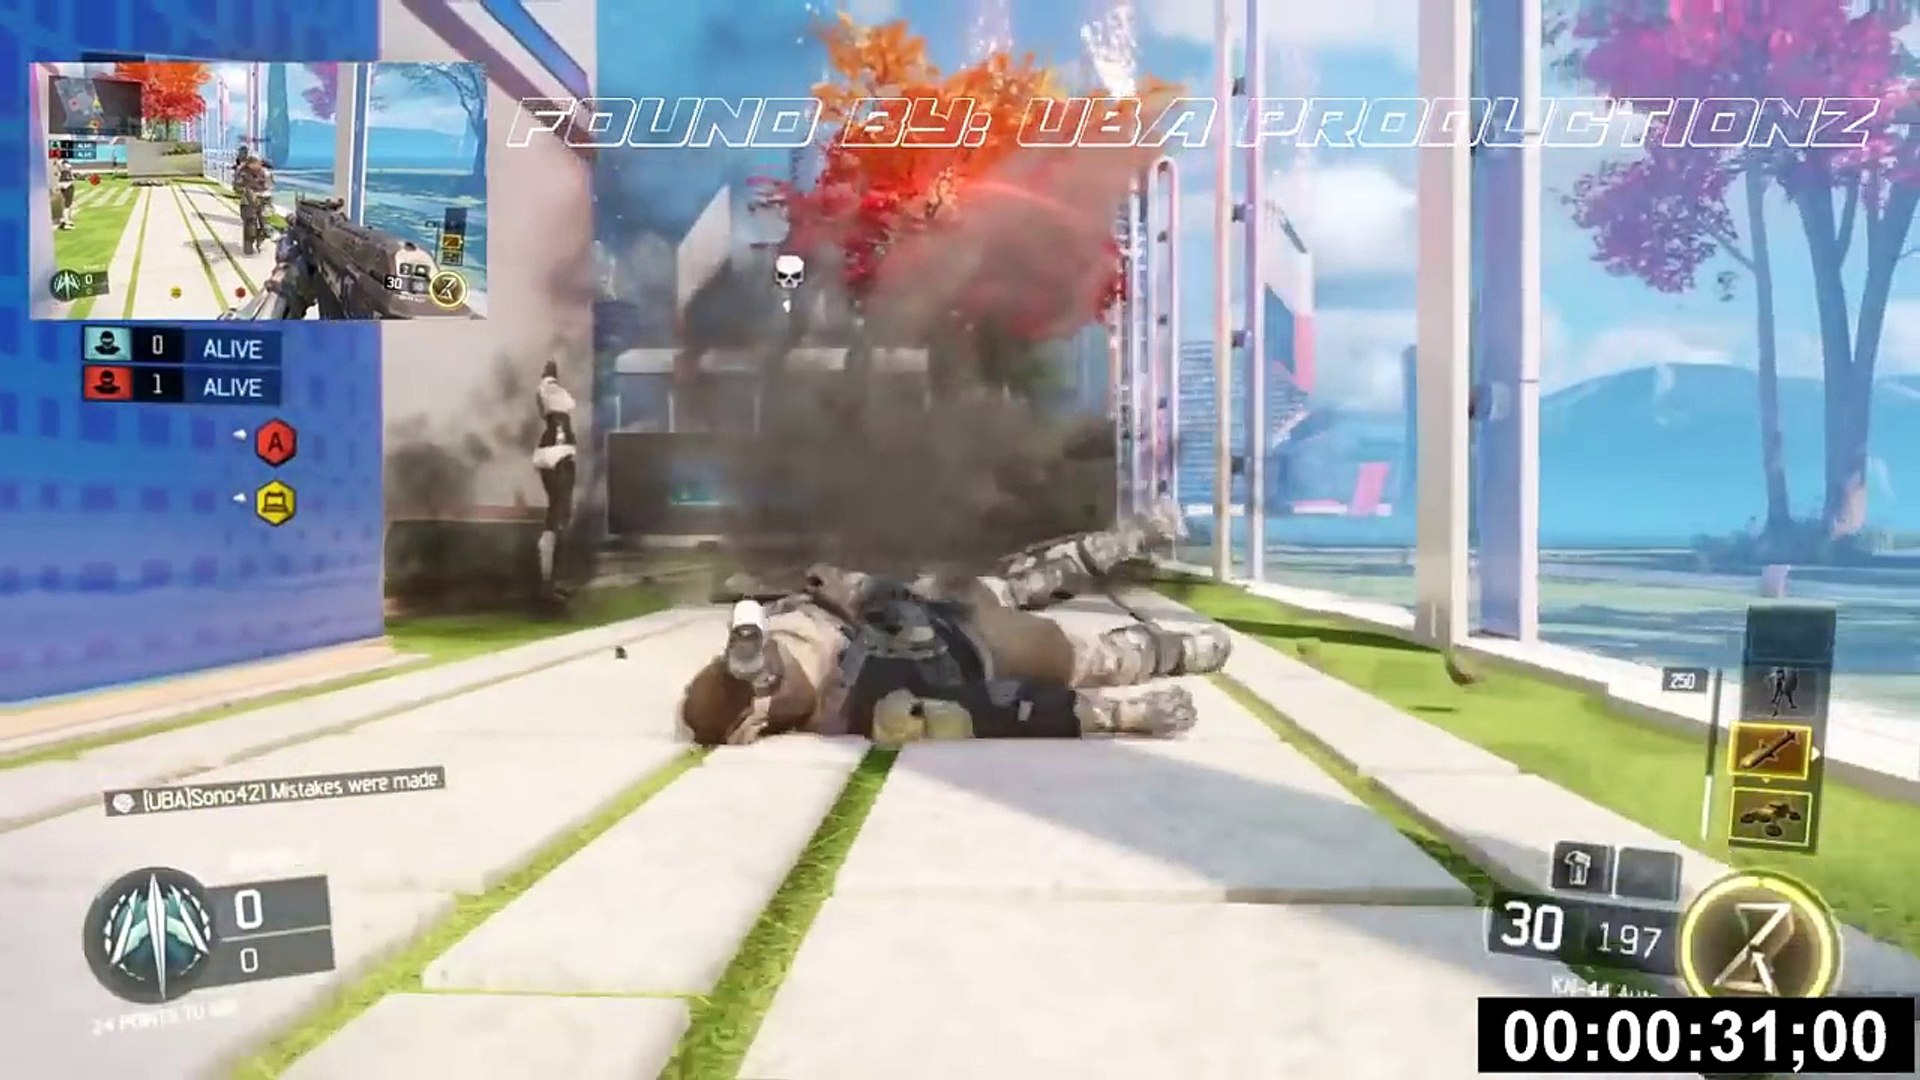 Black Ops 3 Glitches God Mode, Invisibility & Teleporting Glitch! Tutorial  - video Dailymotion